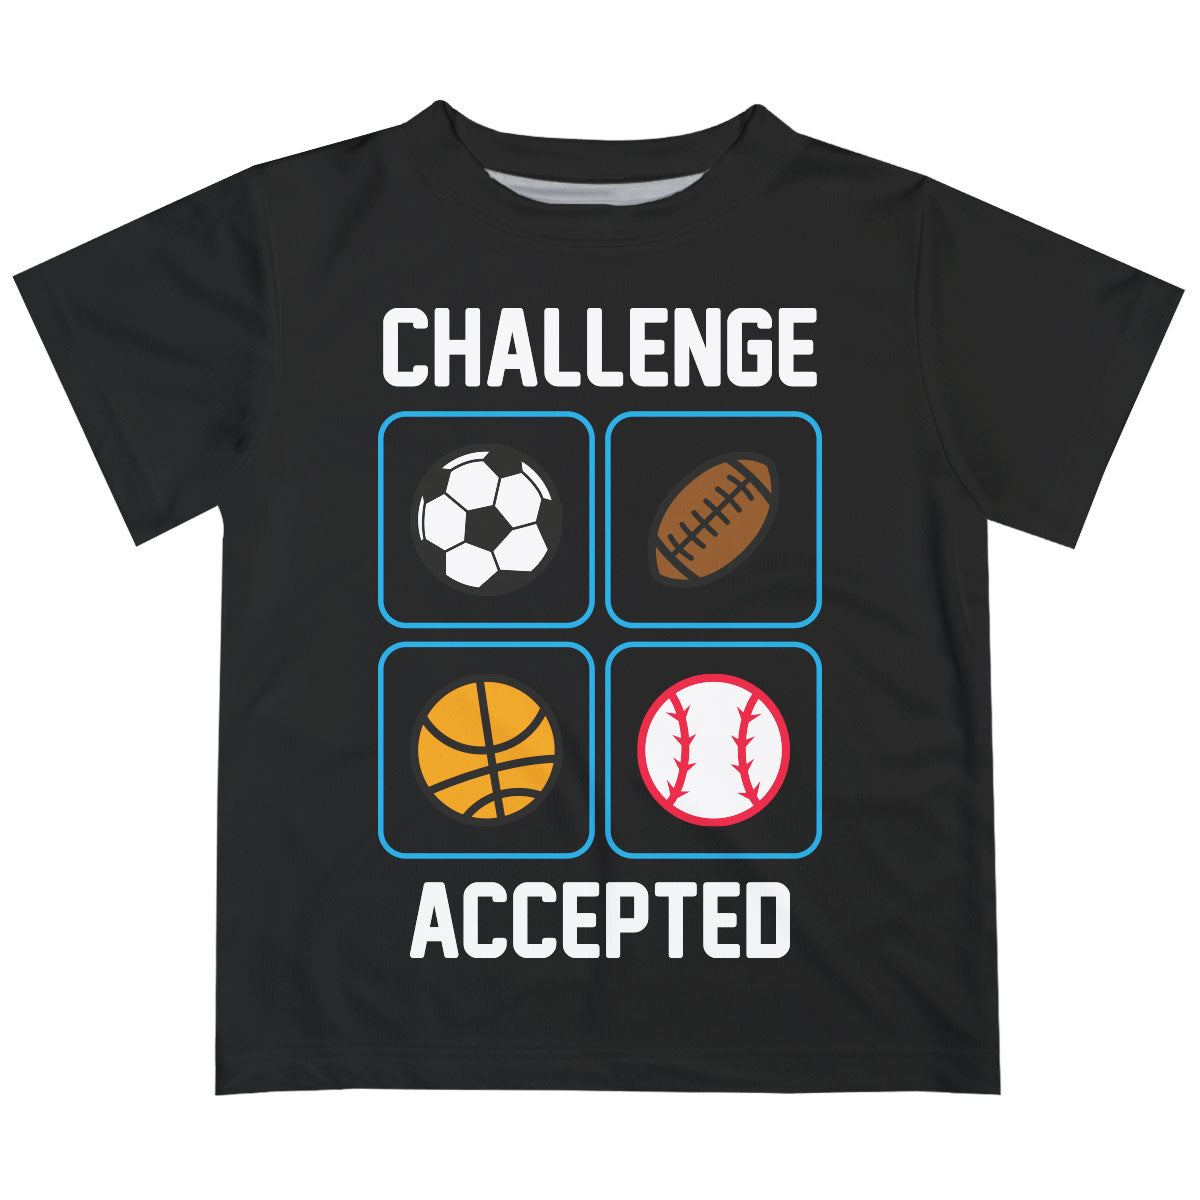 Challenge Accepted Black Short Sleeve Tee Shirt